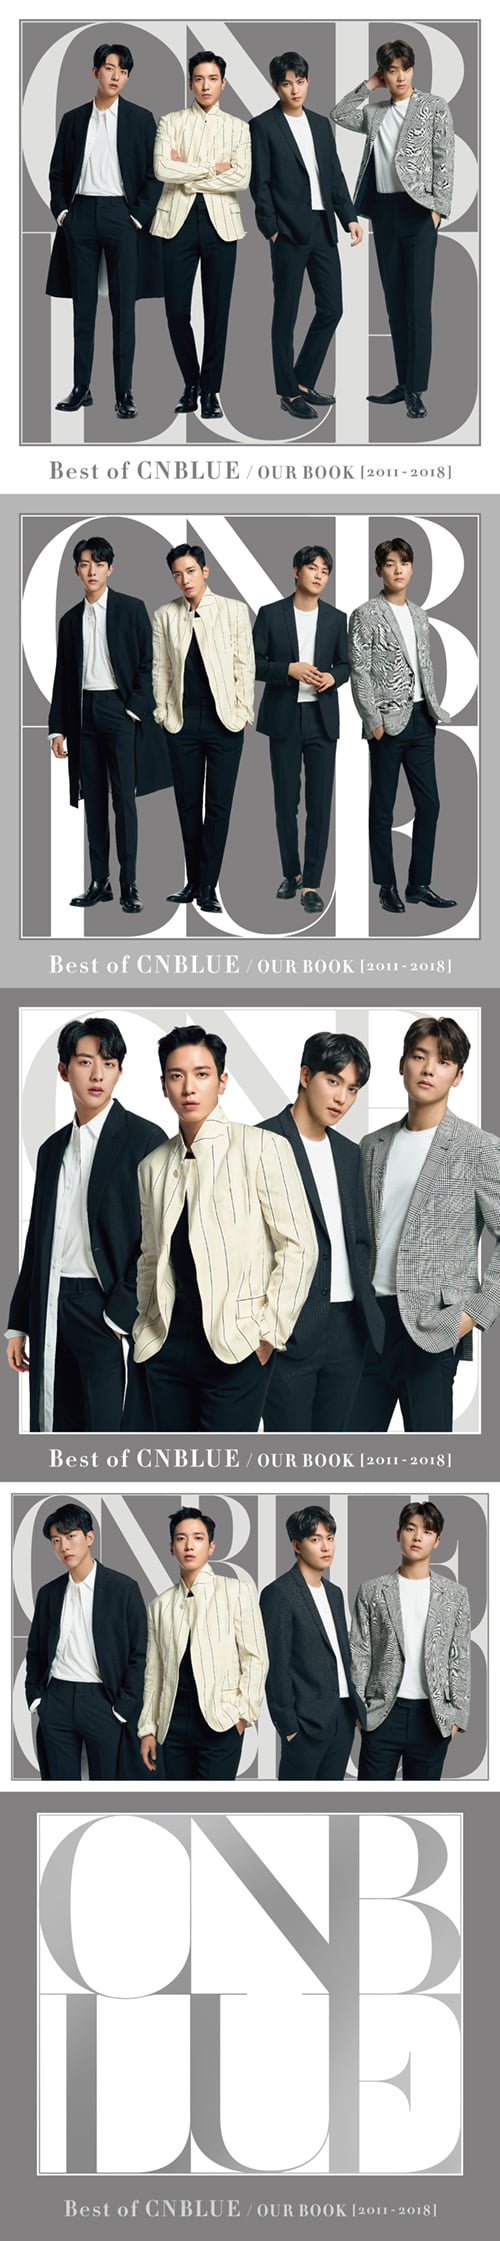 CNBLUE / Best of CNBLUE